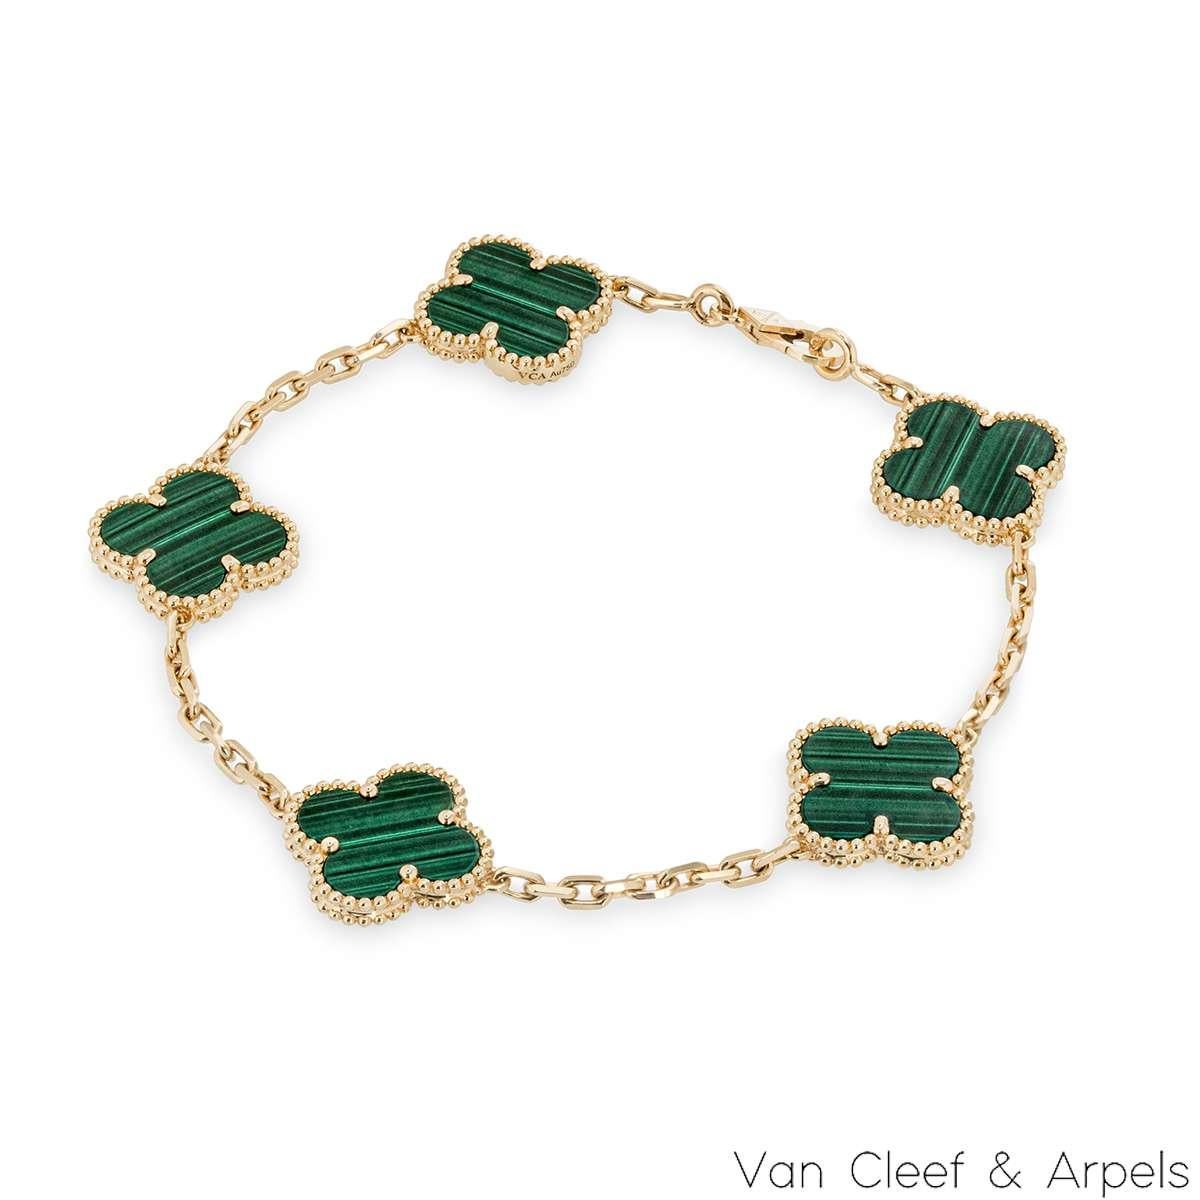 A gorgeous 18k yellow gold malachite bracelet by Van Cleef & Arpels, from the Vintage Alhambra collection. The bracelet features 5 iconic 4 leaf clover motifs, each with a beaded edge and a malachite inlay. The bracelet measures 7.5 inches in